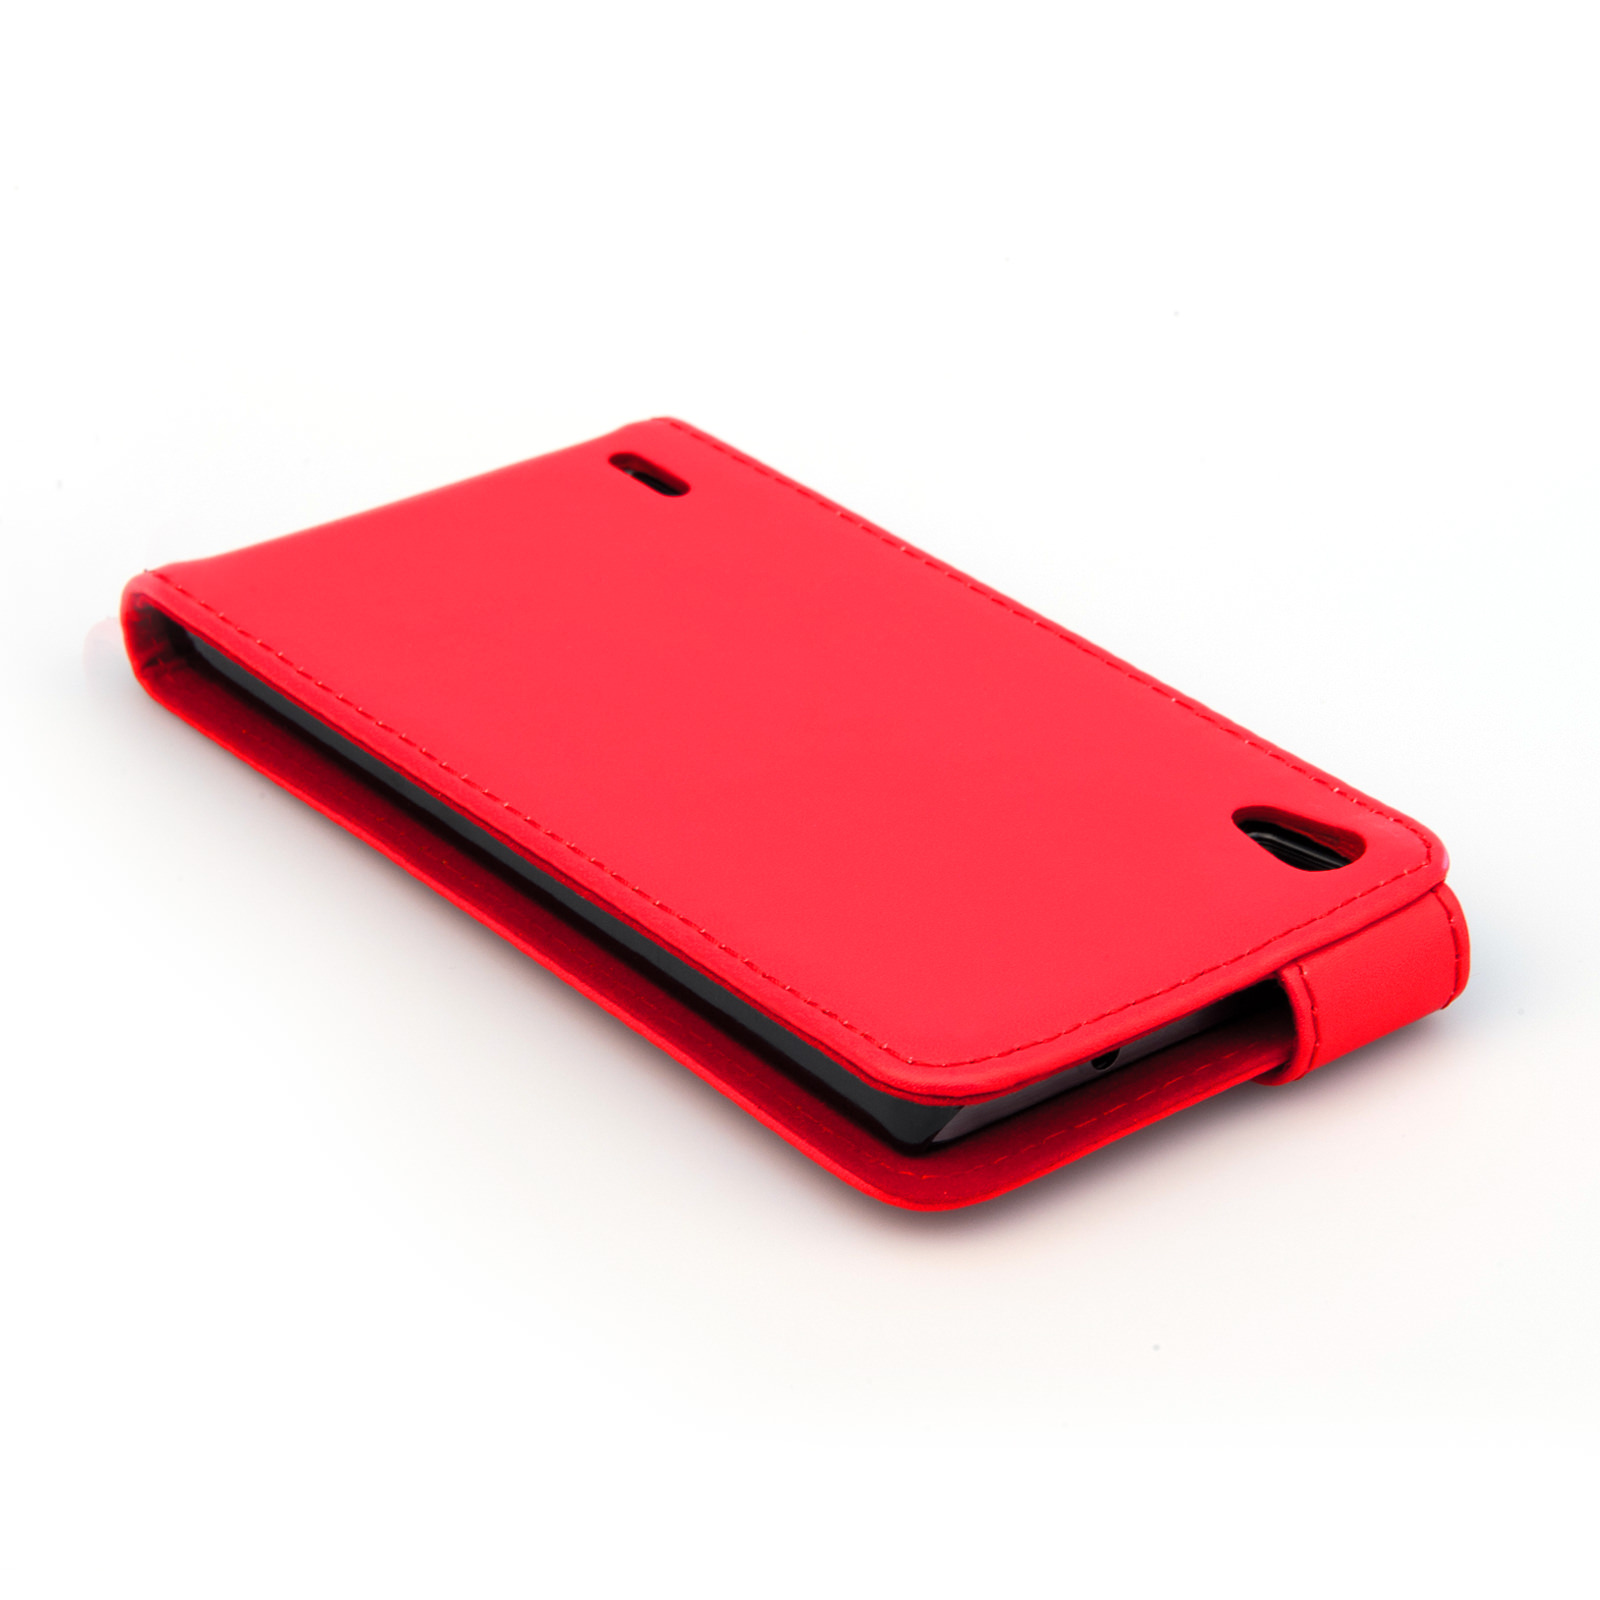 YouSave Accessories Huawei Ascend P7 Leather-Effect Flip Case - Red